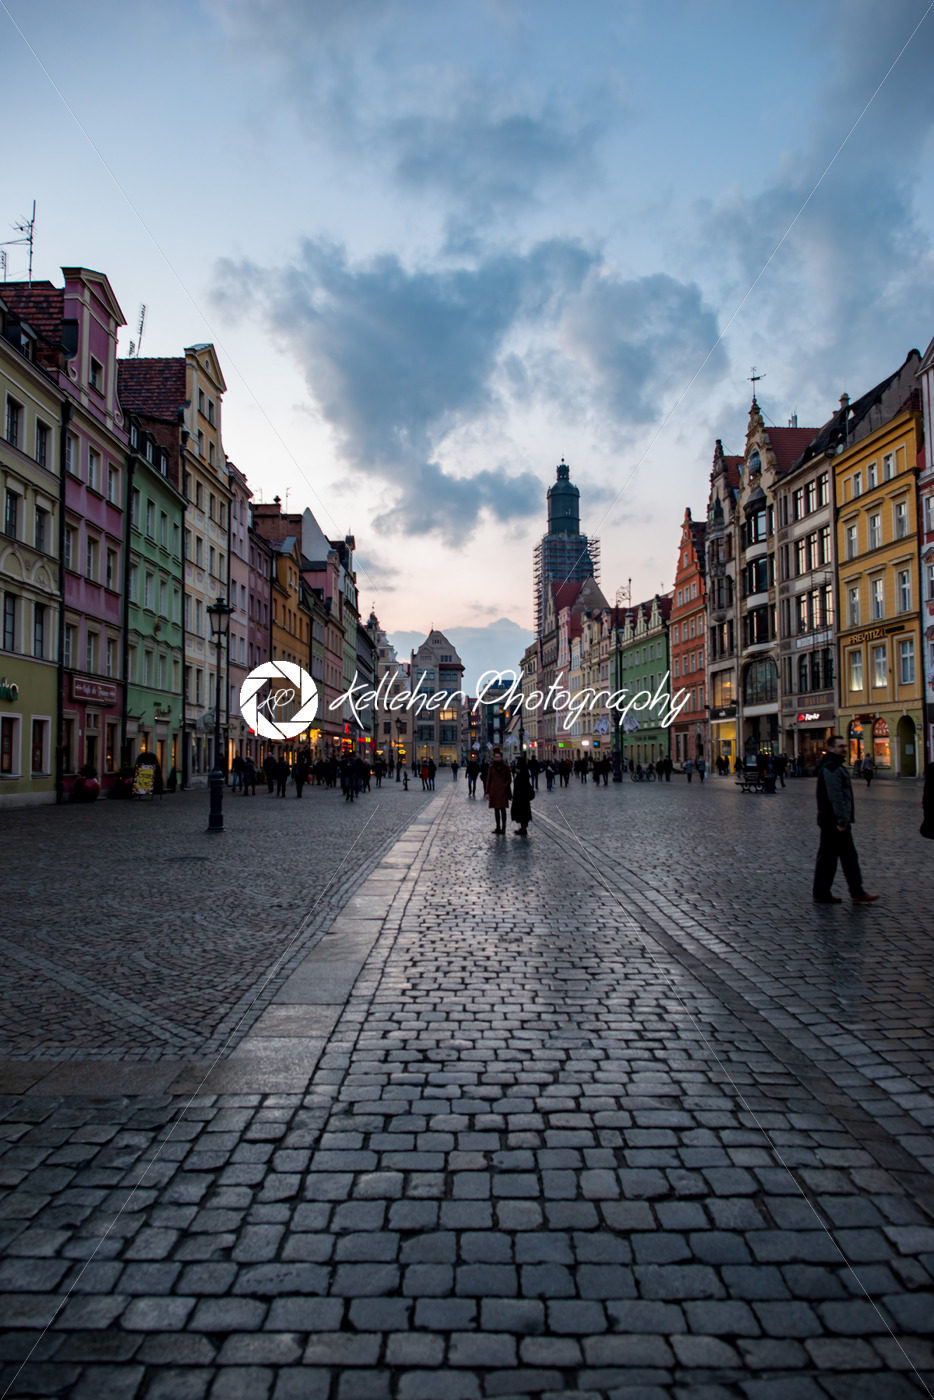 Wroclaw, Poland – March 8, 2018: Wroclaw Market Square in evening after rain storm in historic capital of Silesia, Poland, Europe. - Kelleher Photography Store